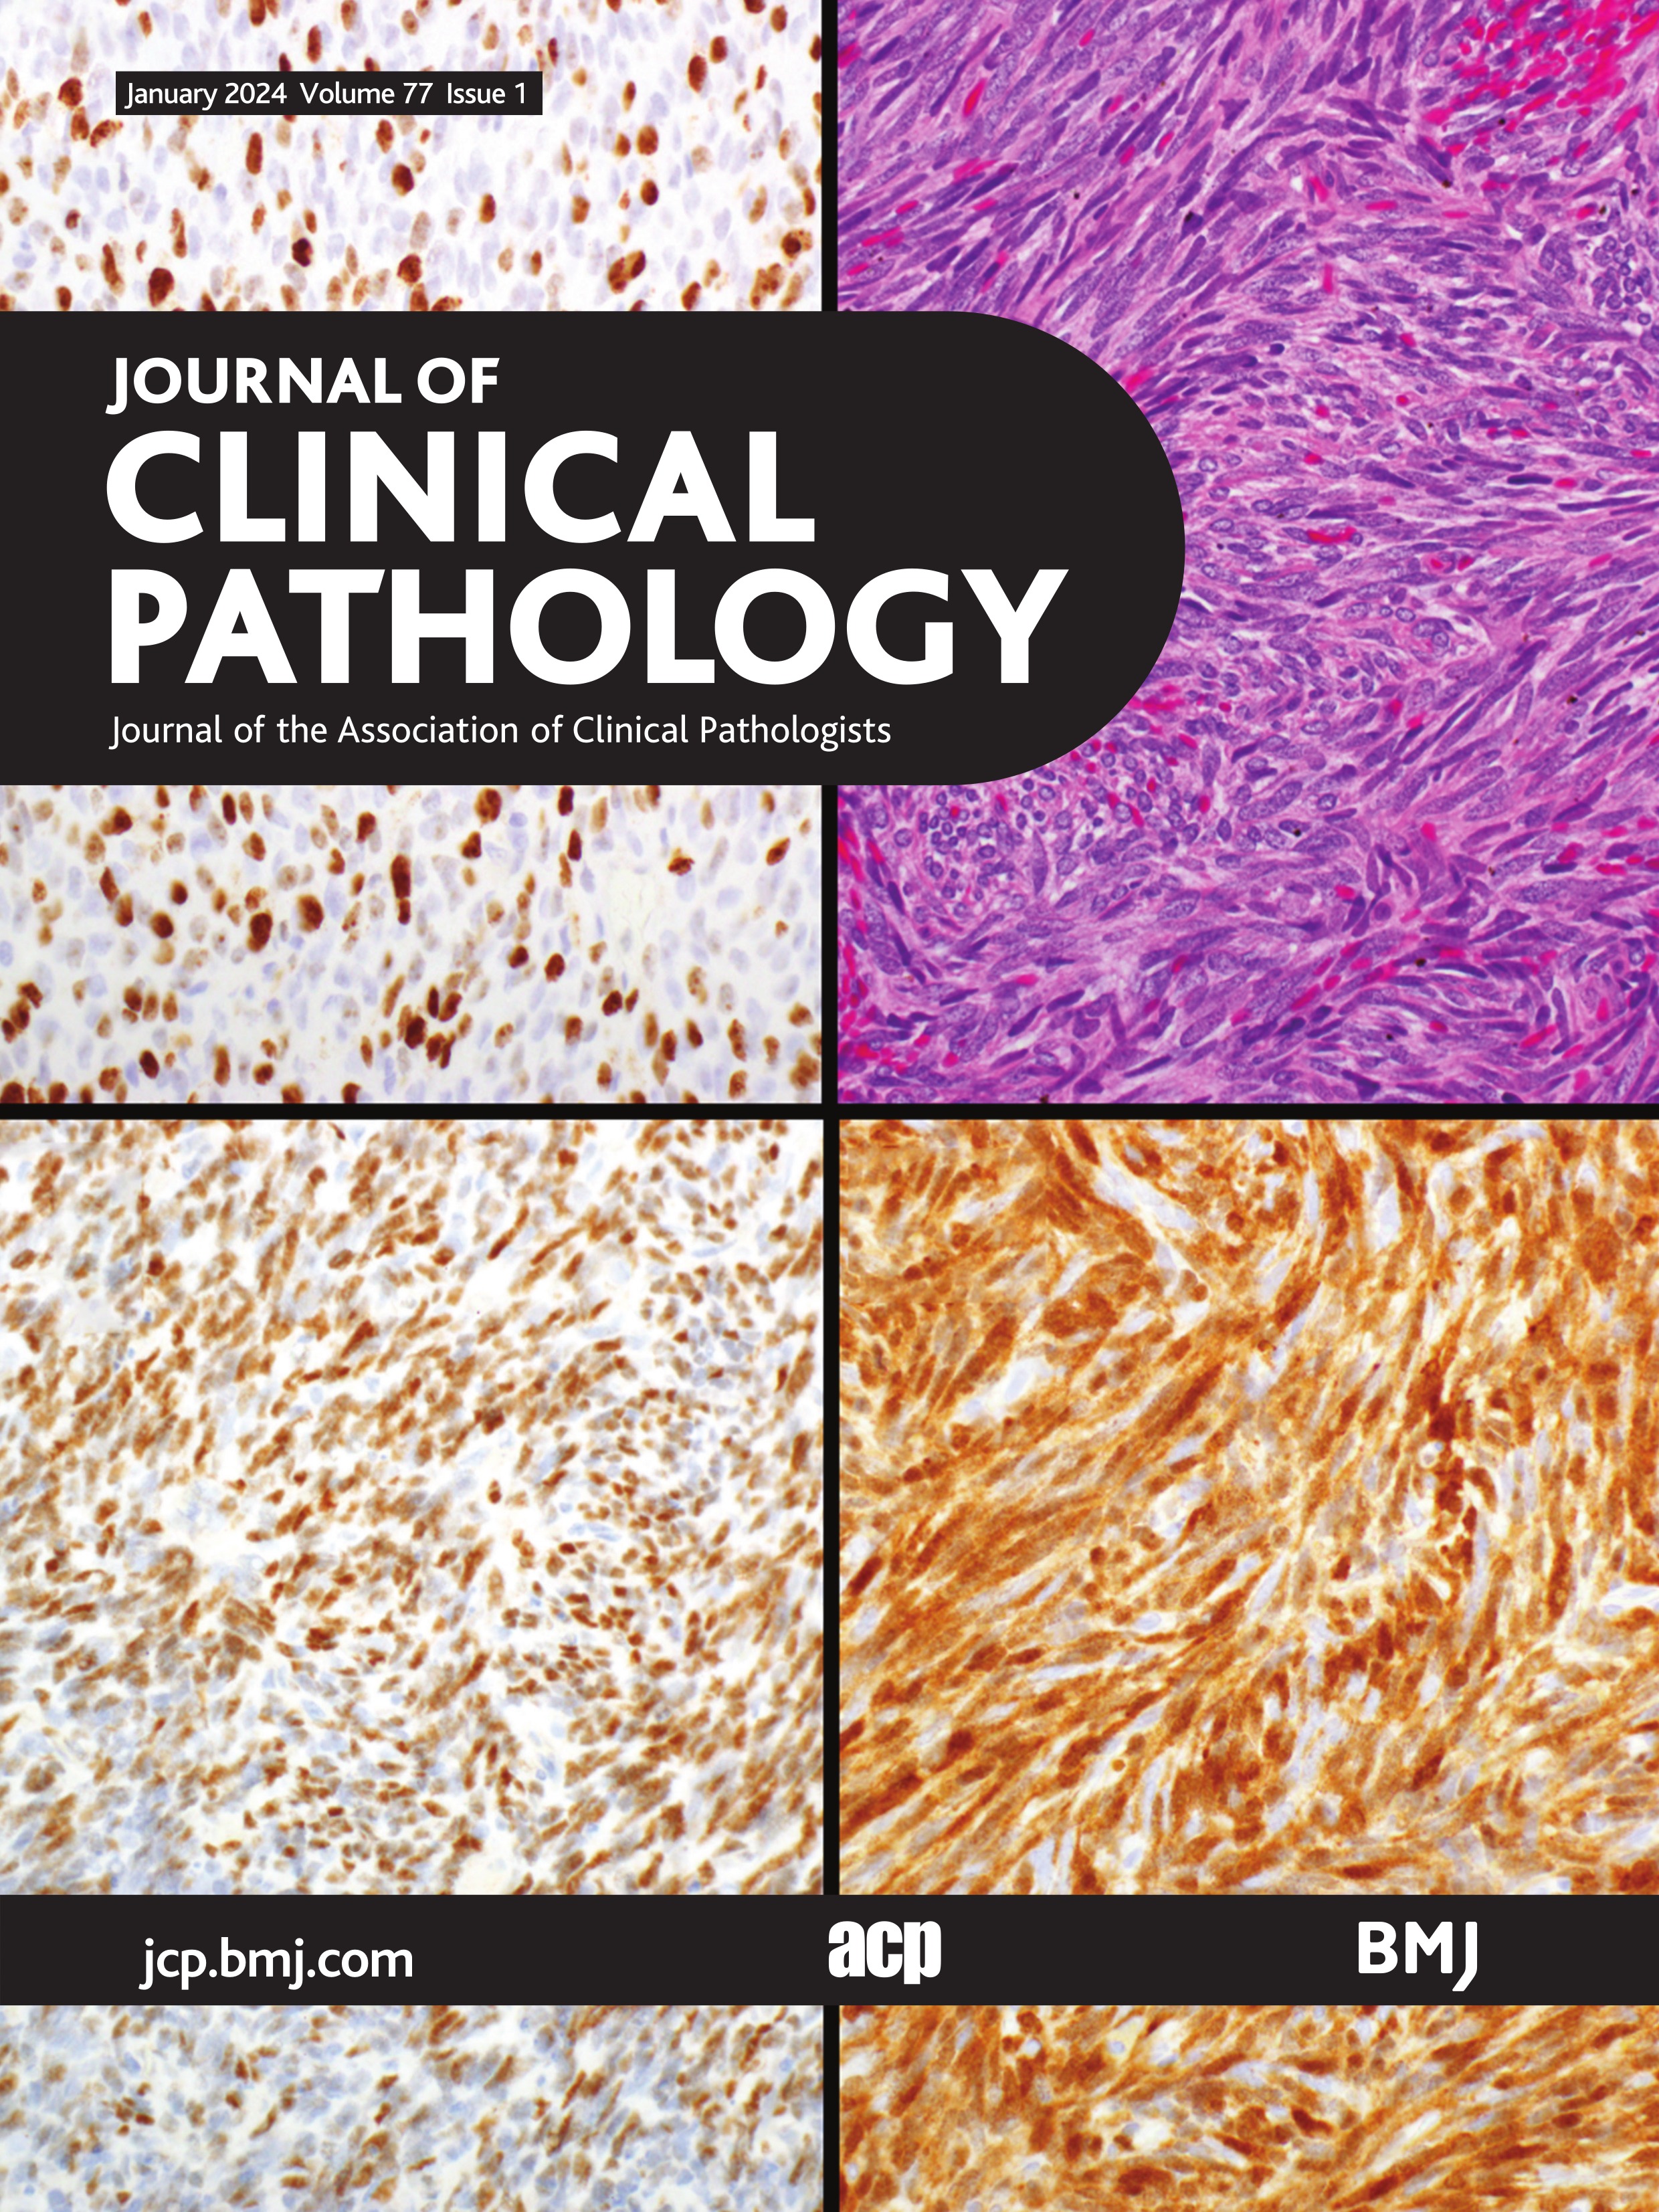 Granulomas in bone marrow biopsies: clinicopathological significance and new perspectives